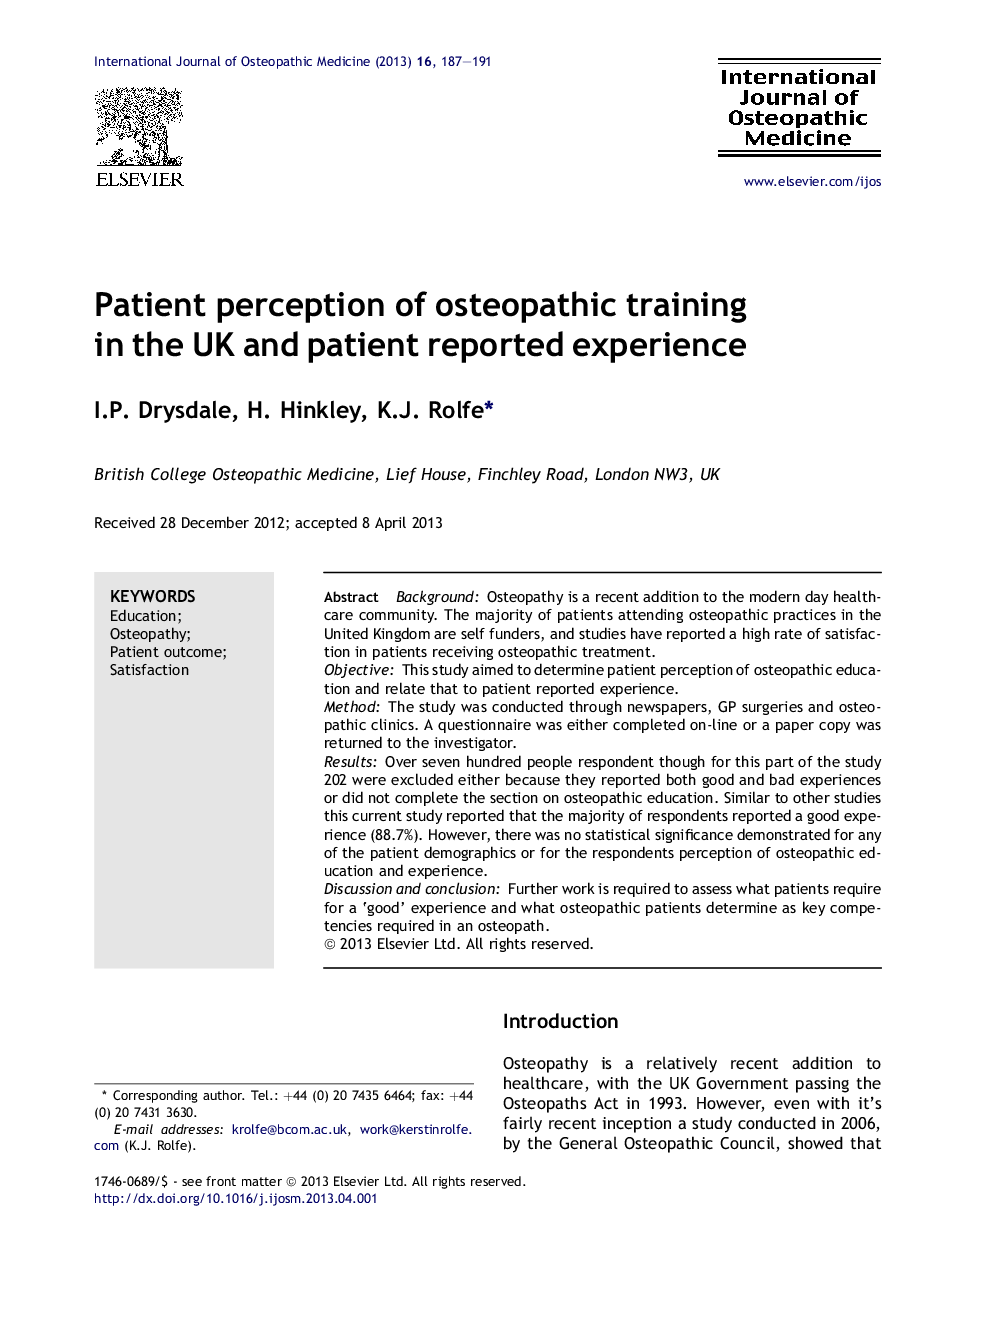 Patient perception of osteopathic training in the UK and patient reported experience